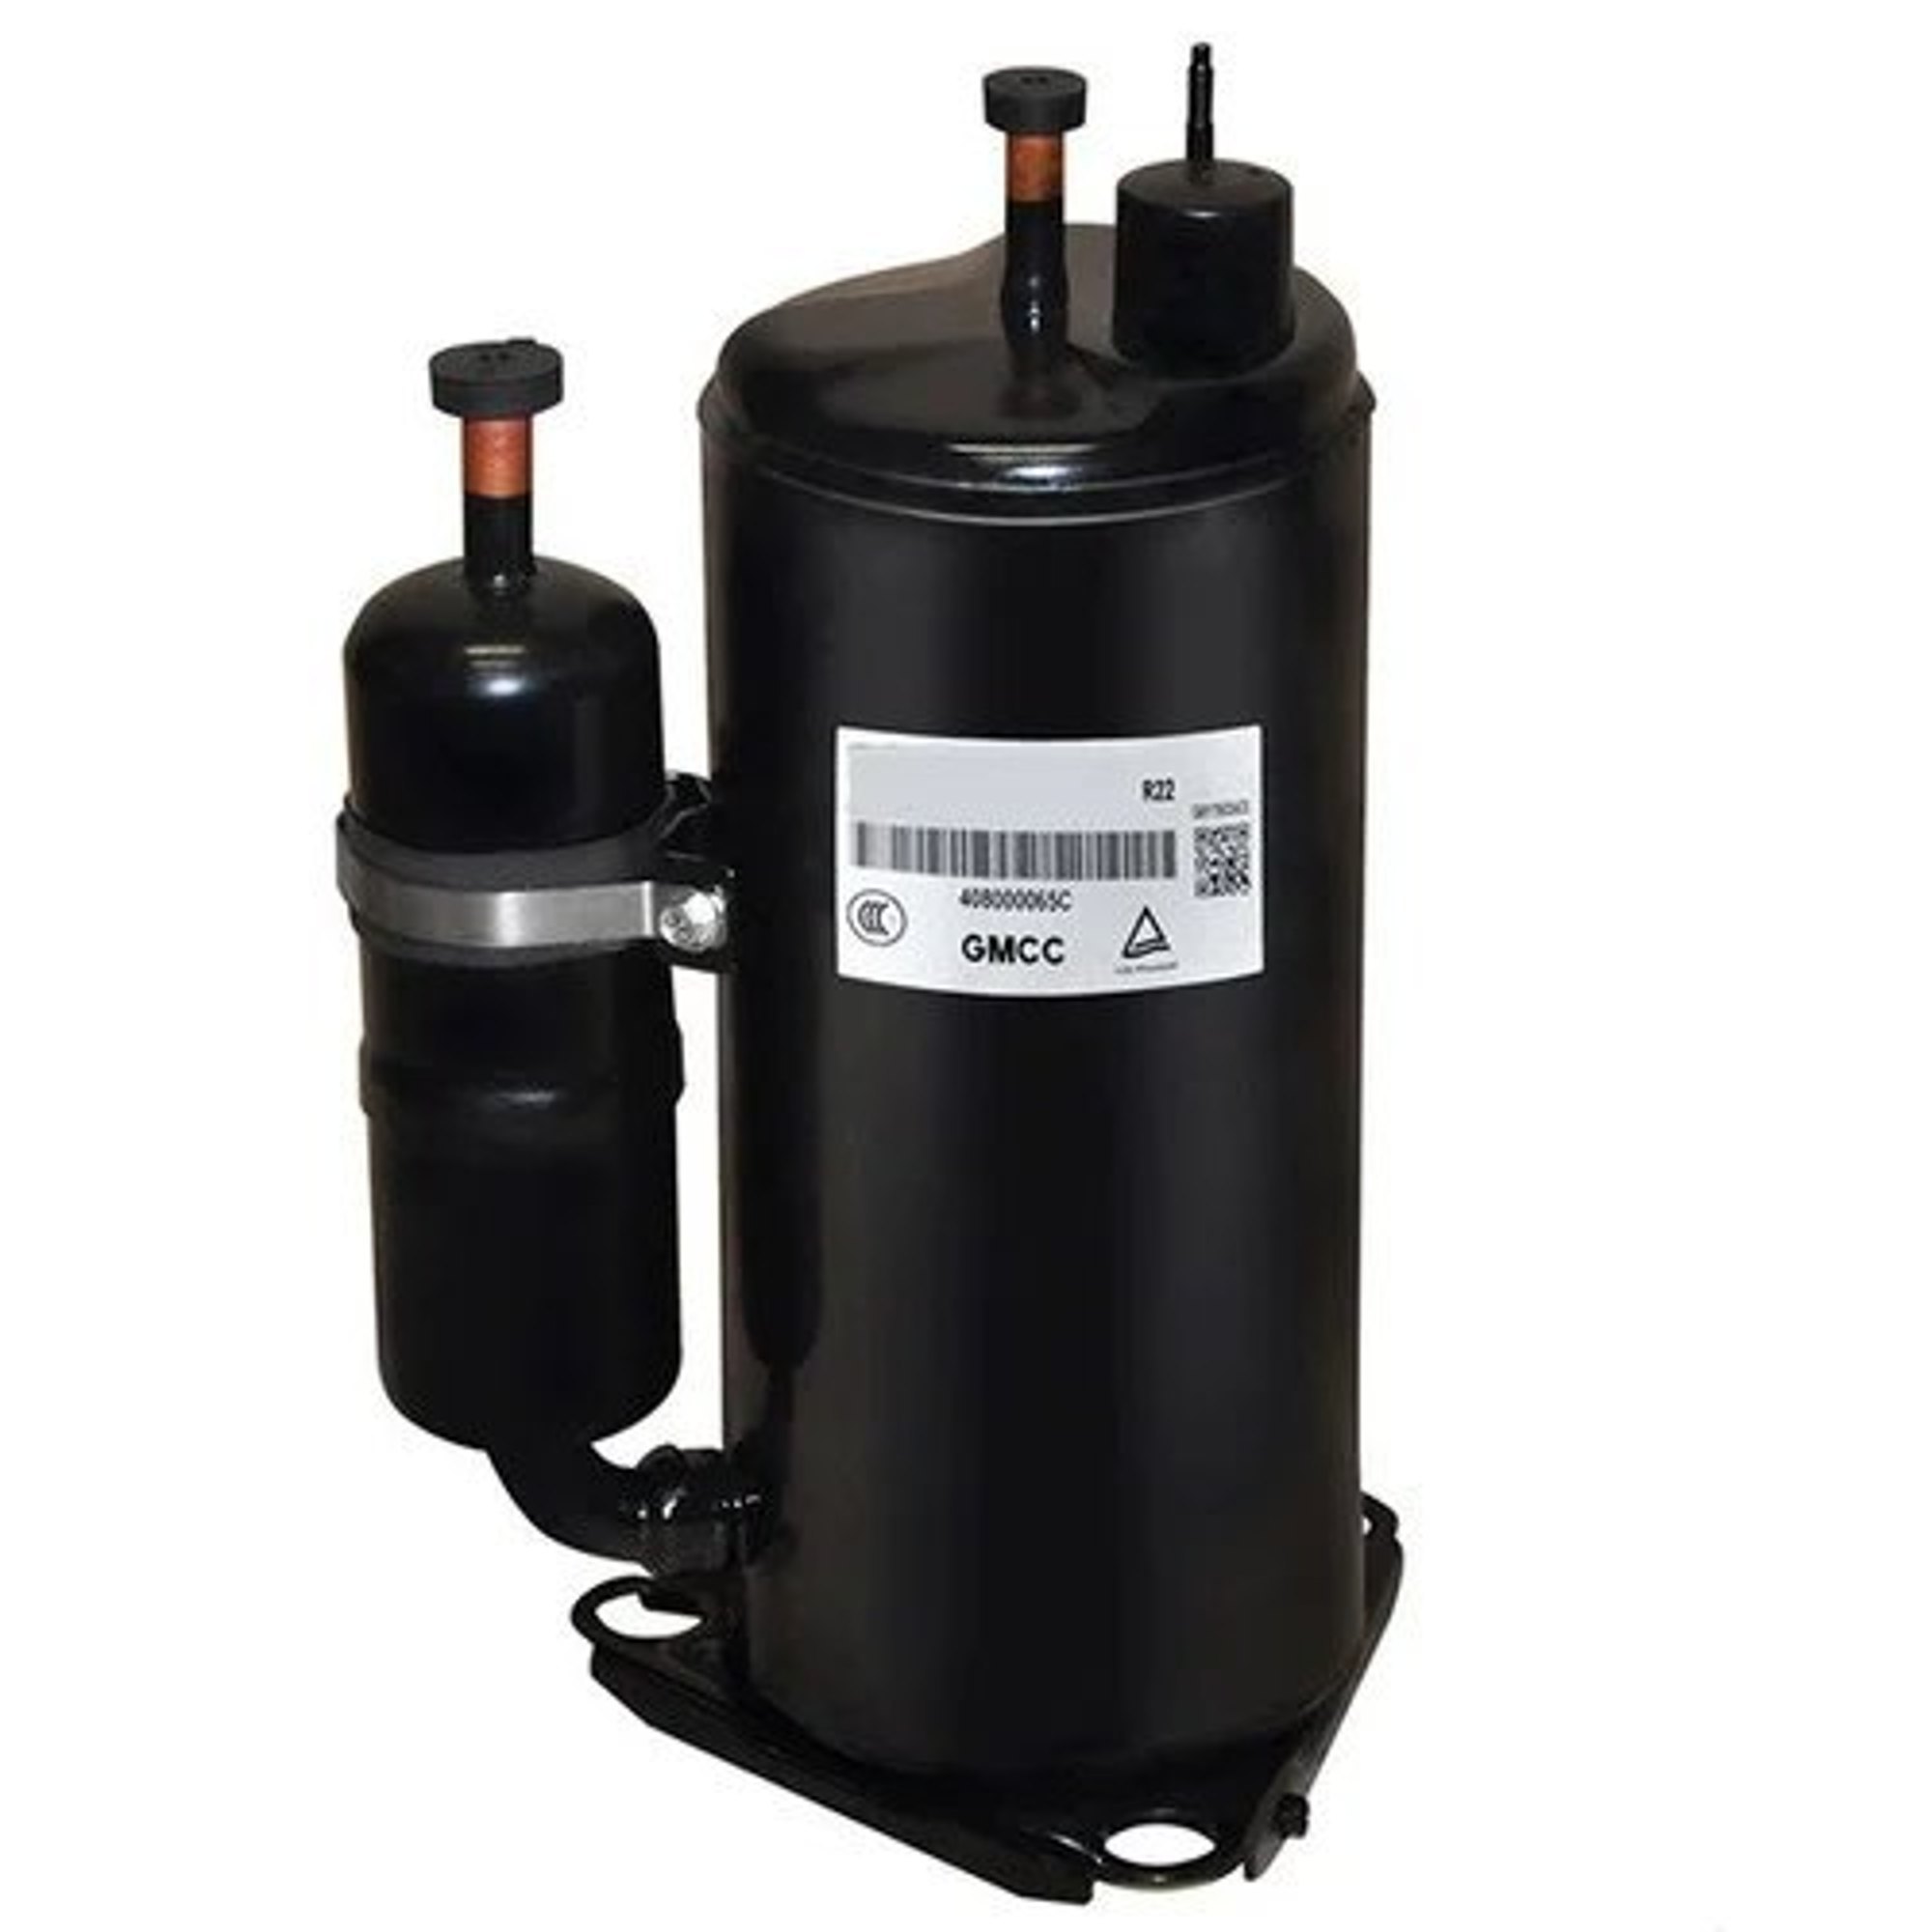  GMCC  Rotary Compressor Product Image 2